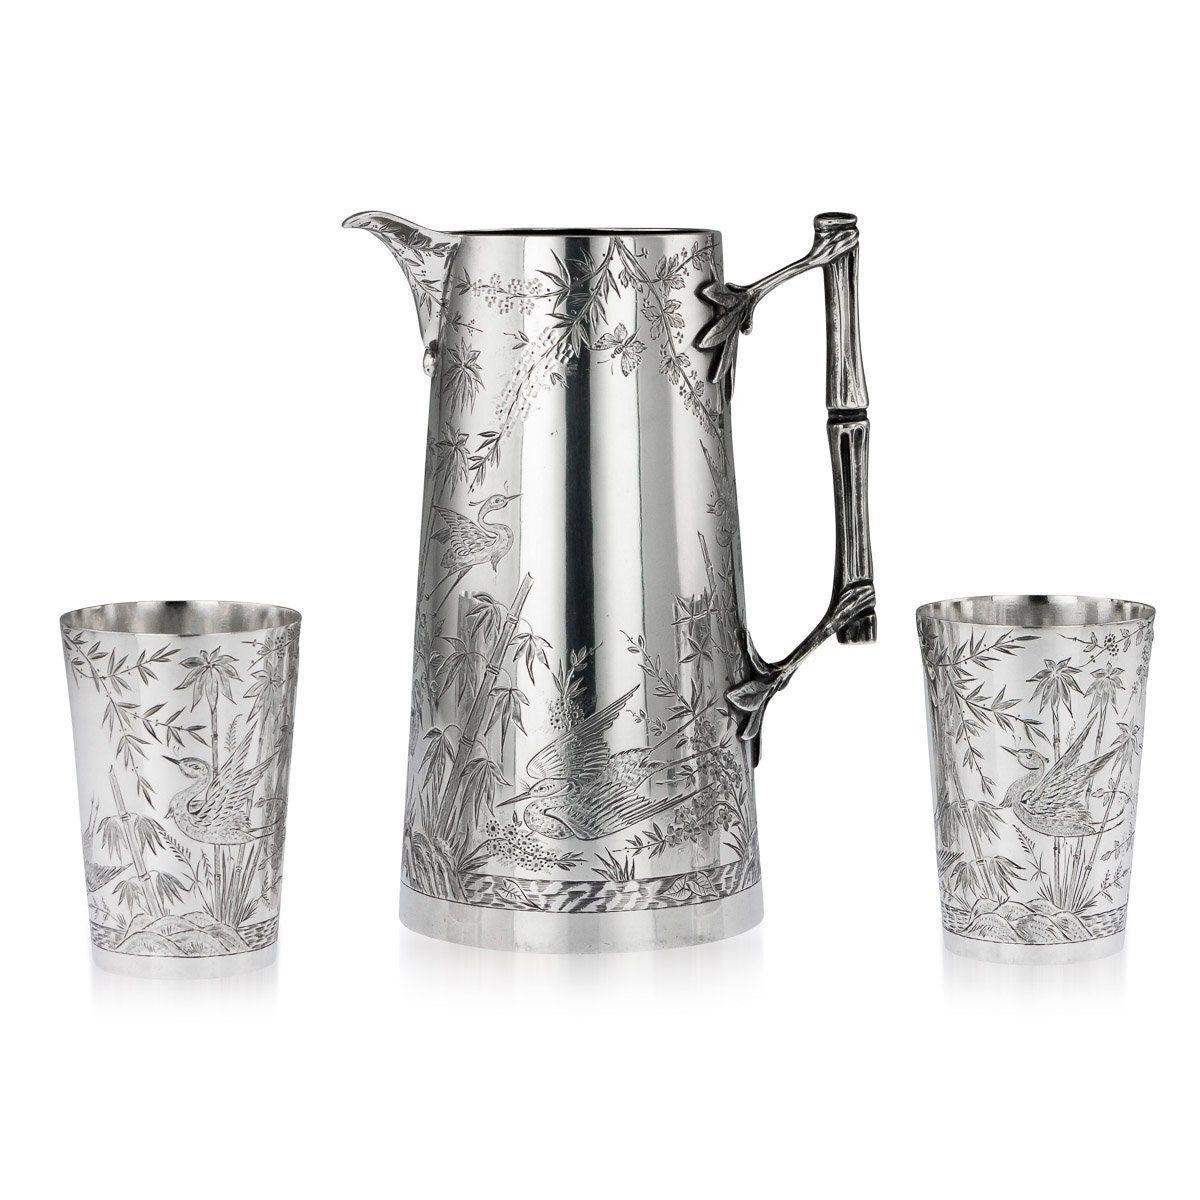 19thC Victorian Aesthetic Movement Solid Silver Jug & Beakers c.1883